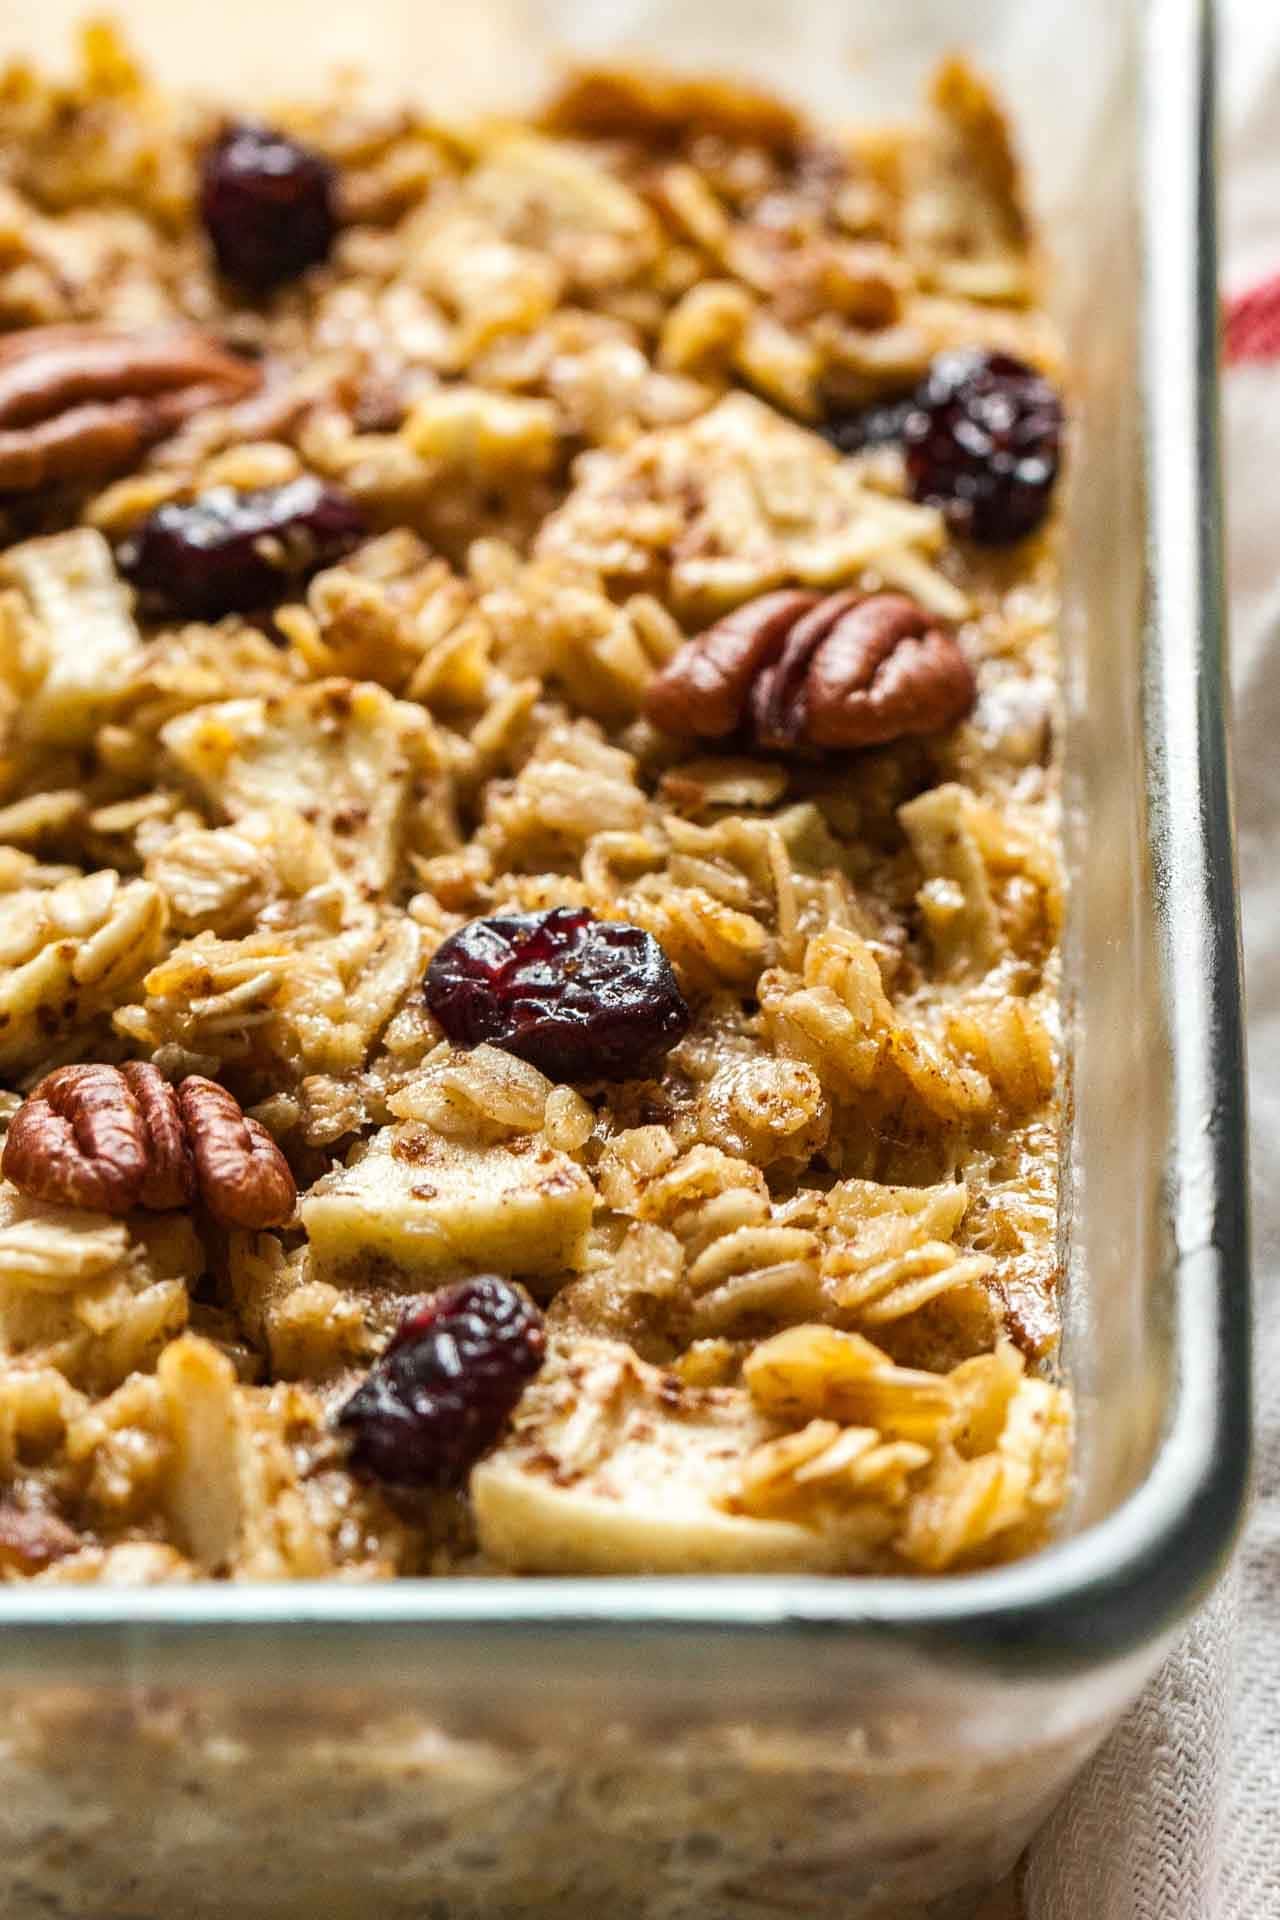 Baked oatmeal with apples, pecans, and cranberries on a glass baking dish.